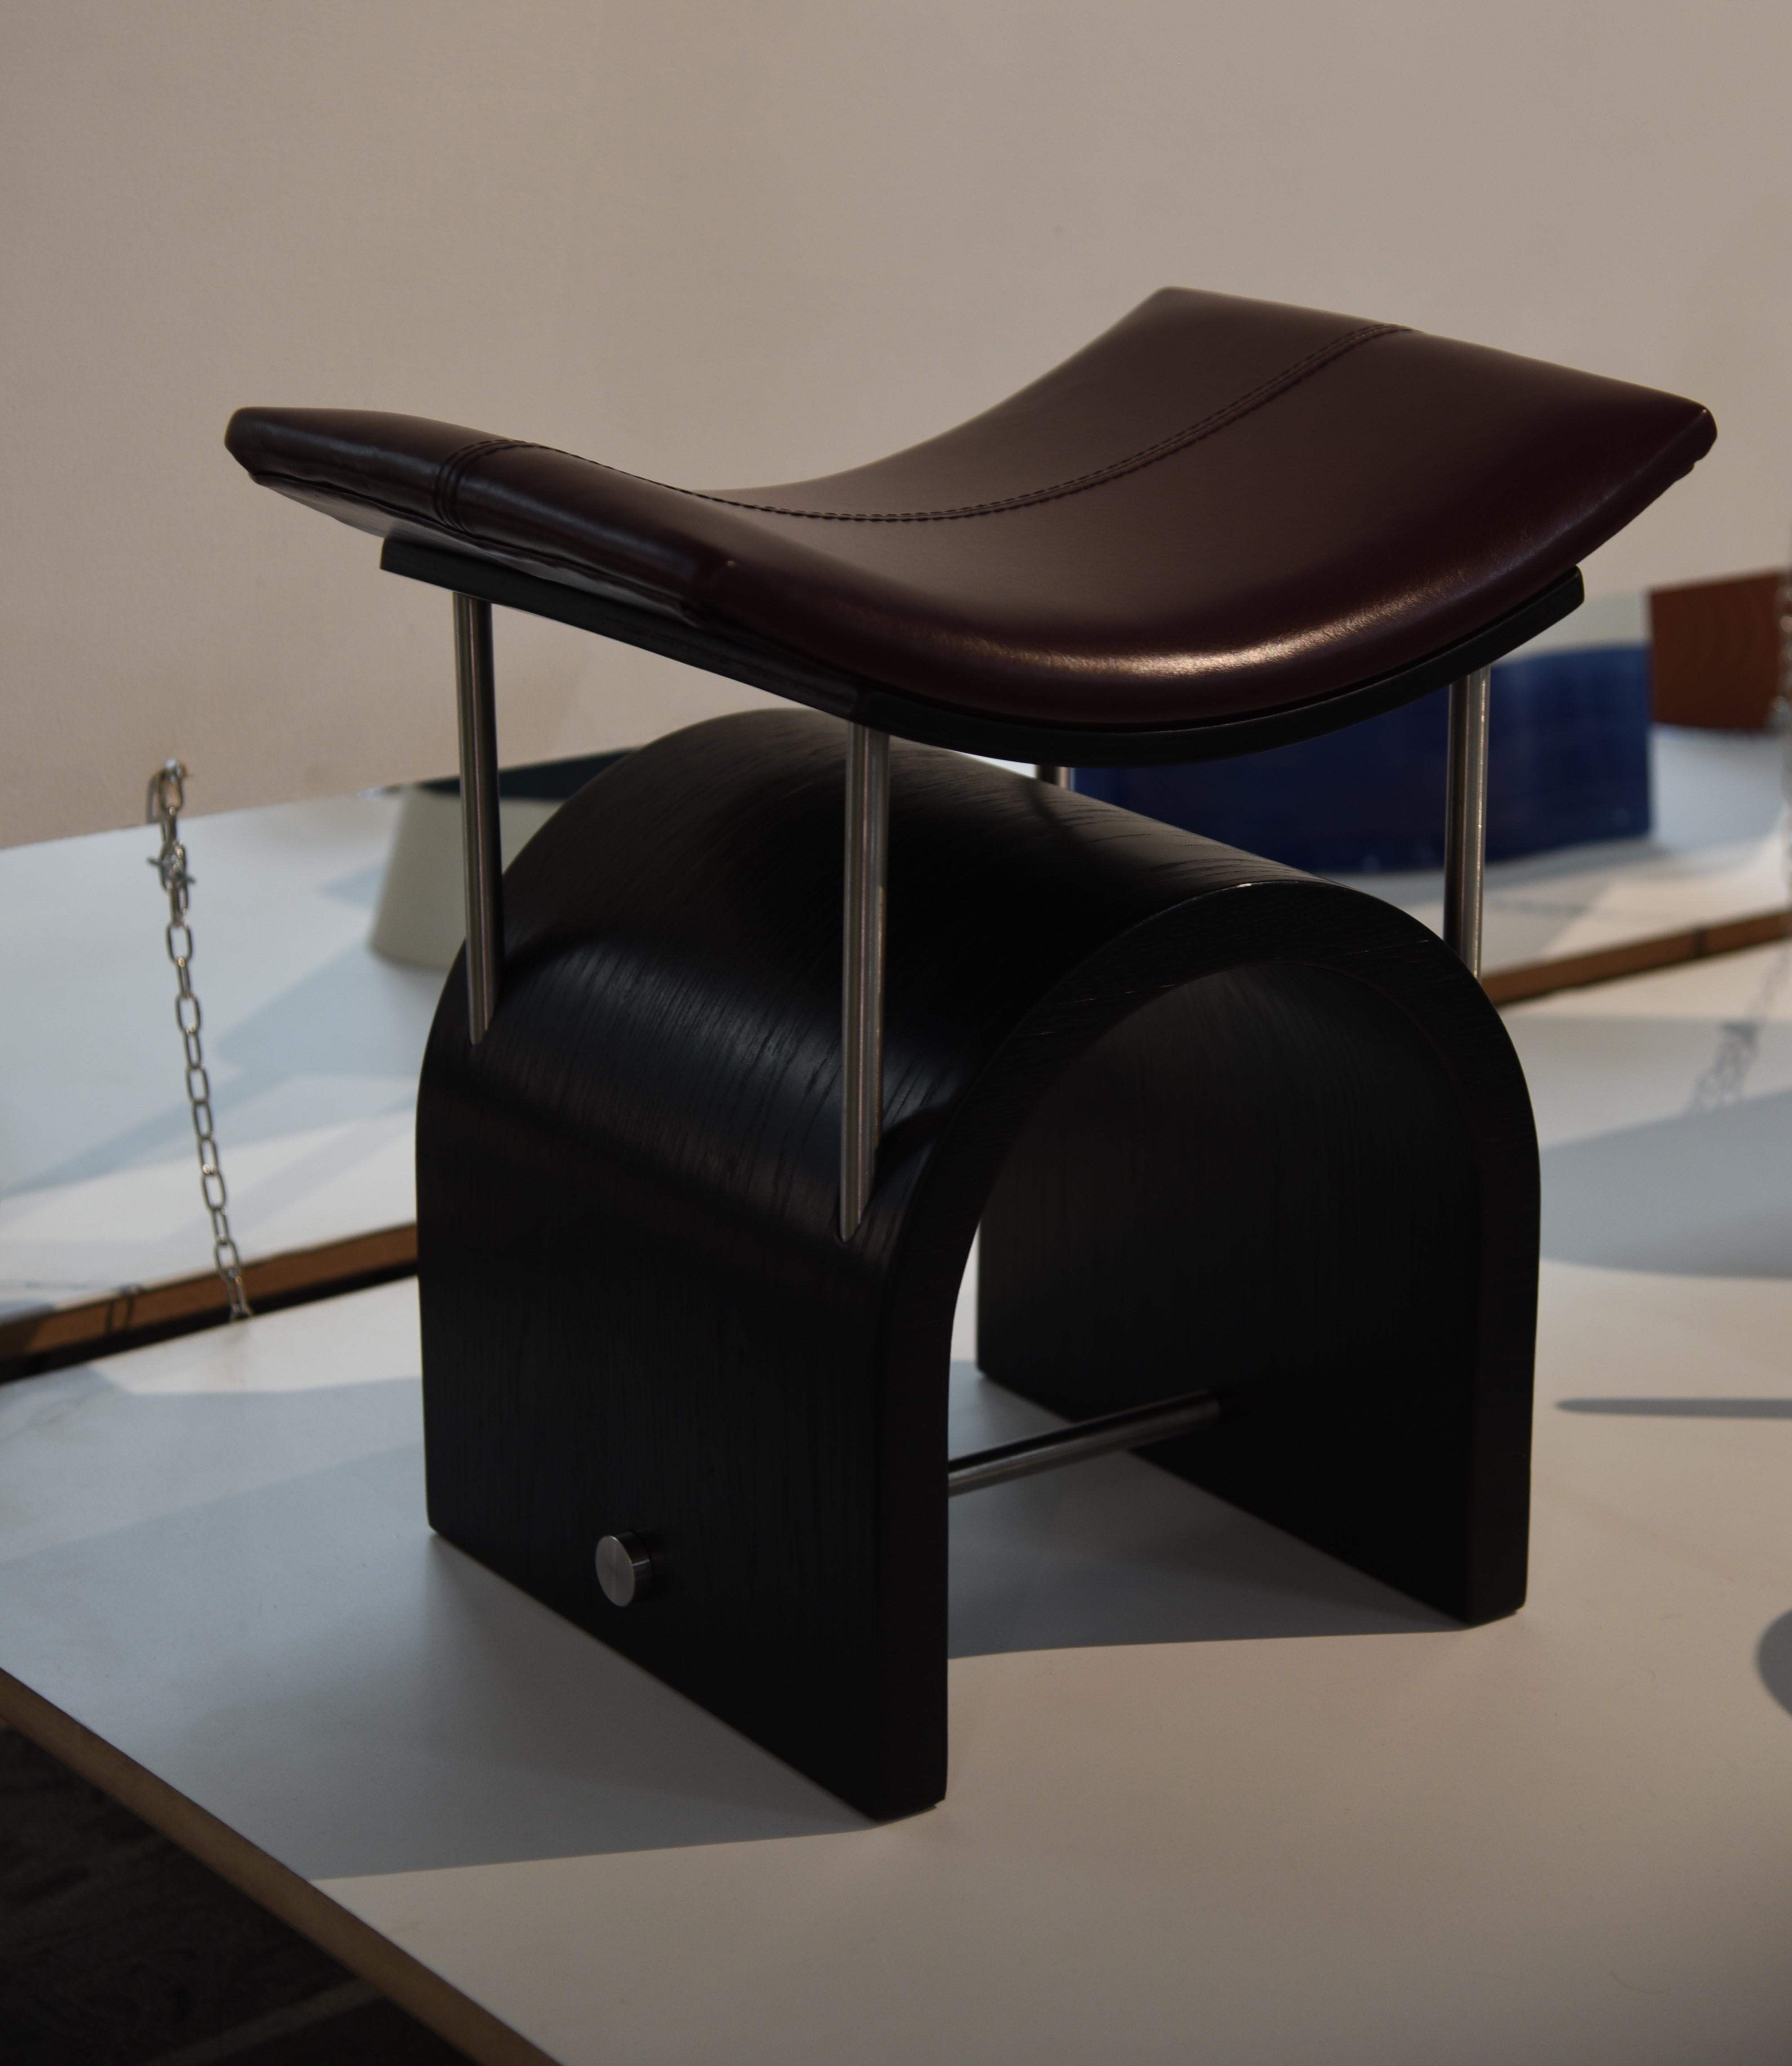 Wing stool by Studio Laf 
Dimensions: L43 cm x W35 x H44 cm
Materials: Plywood, Stainless Steel, Leather
Available: different colors Leather: Brown, Black, Antique Brown, Cherry Red. Also available in Wood: Black, Walnut, Dark Walnut.

It